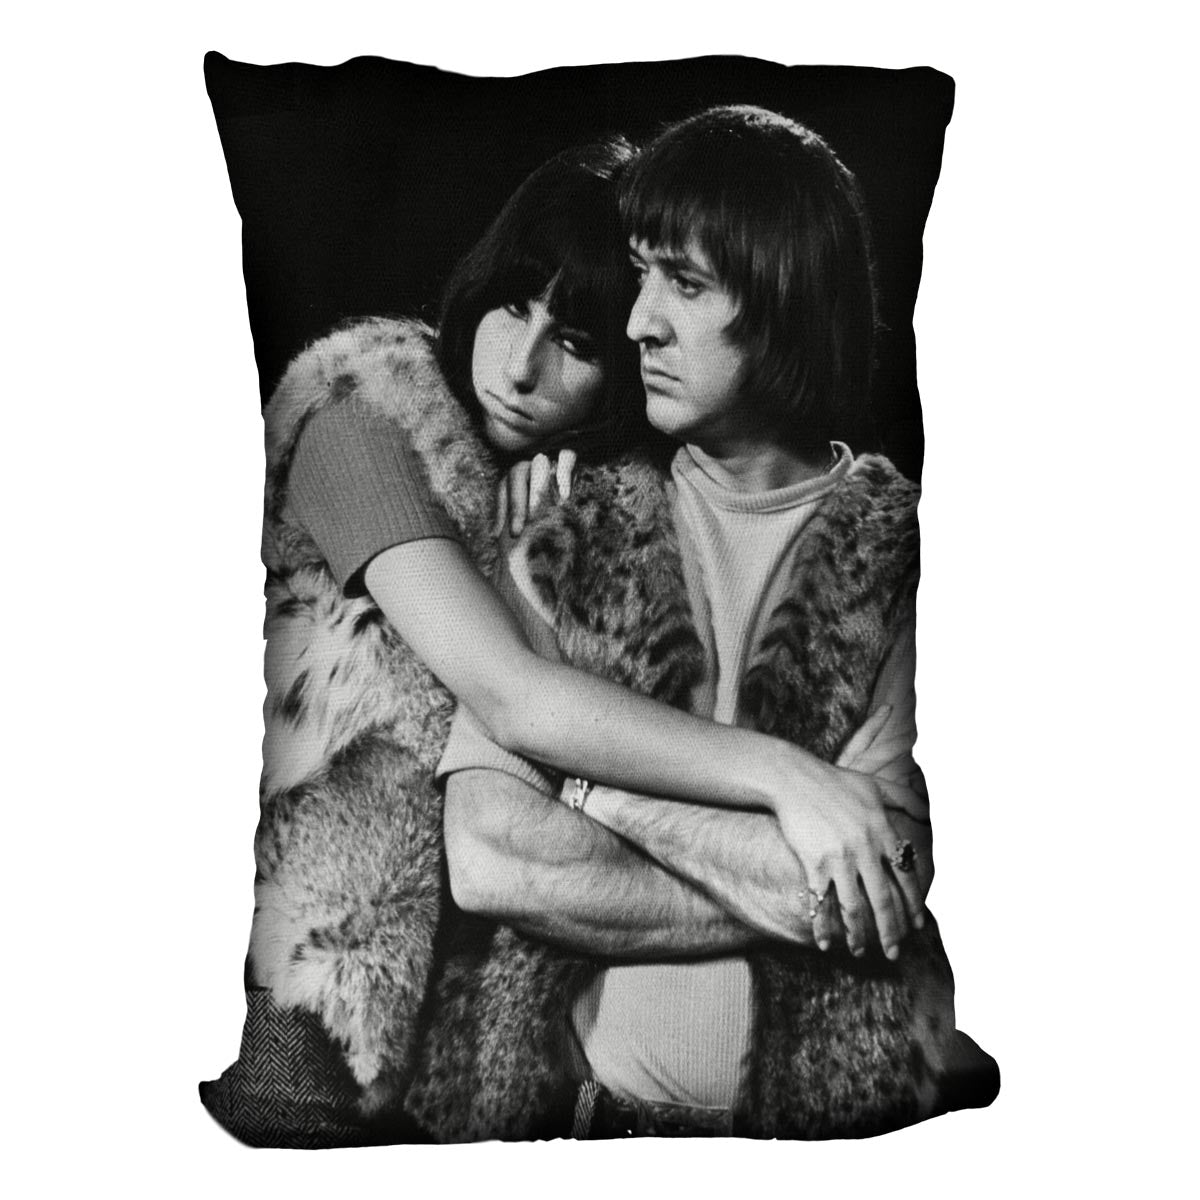 Sonny and Cher hugging Cushion